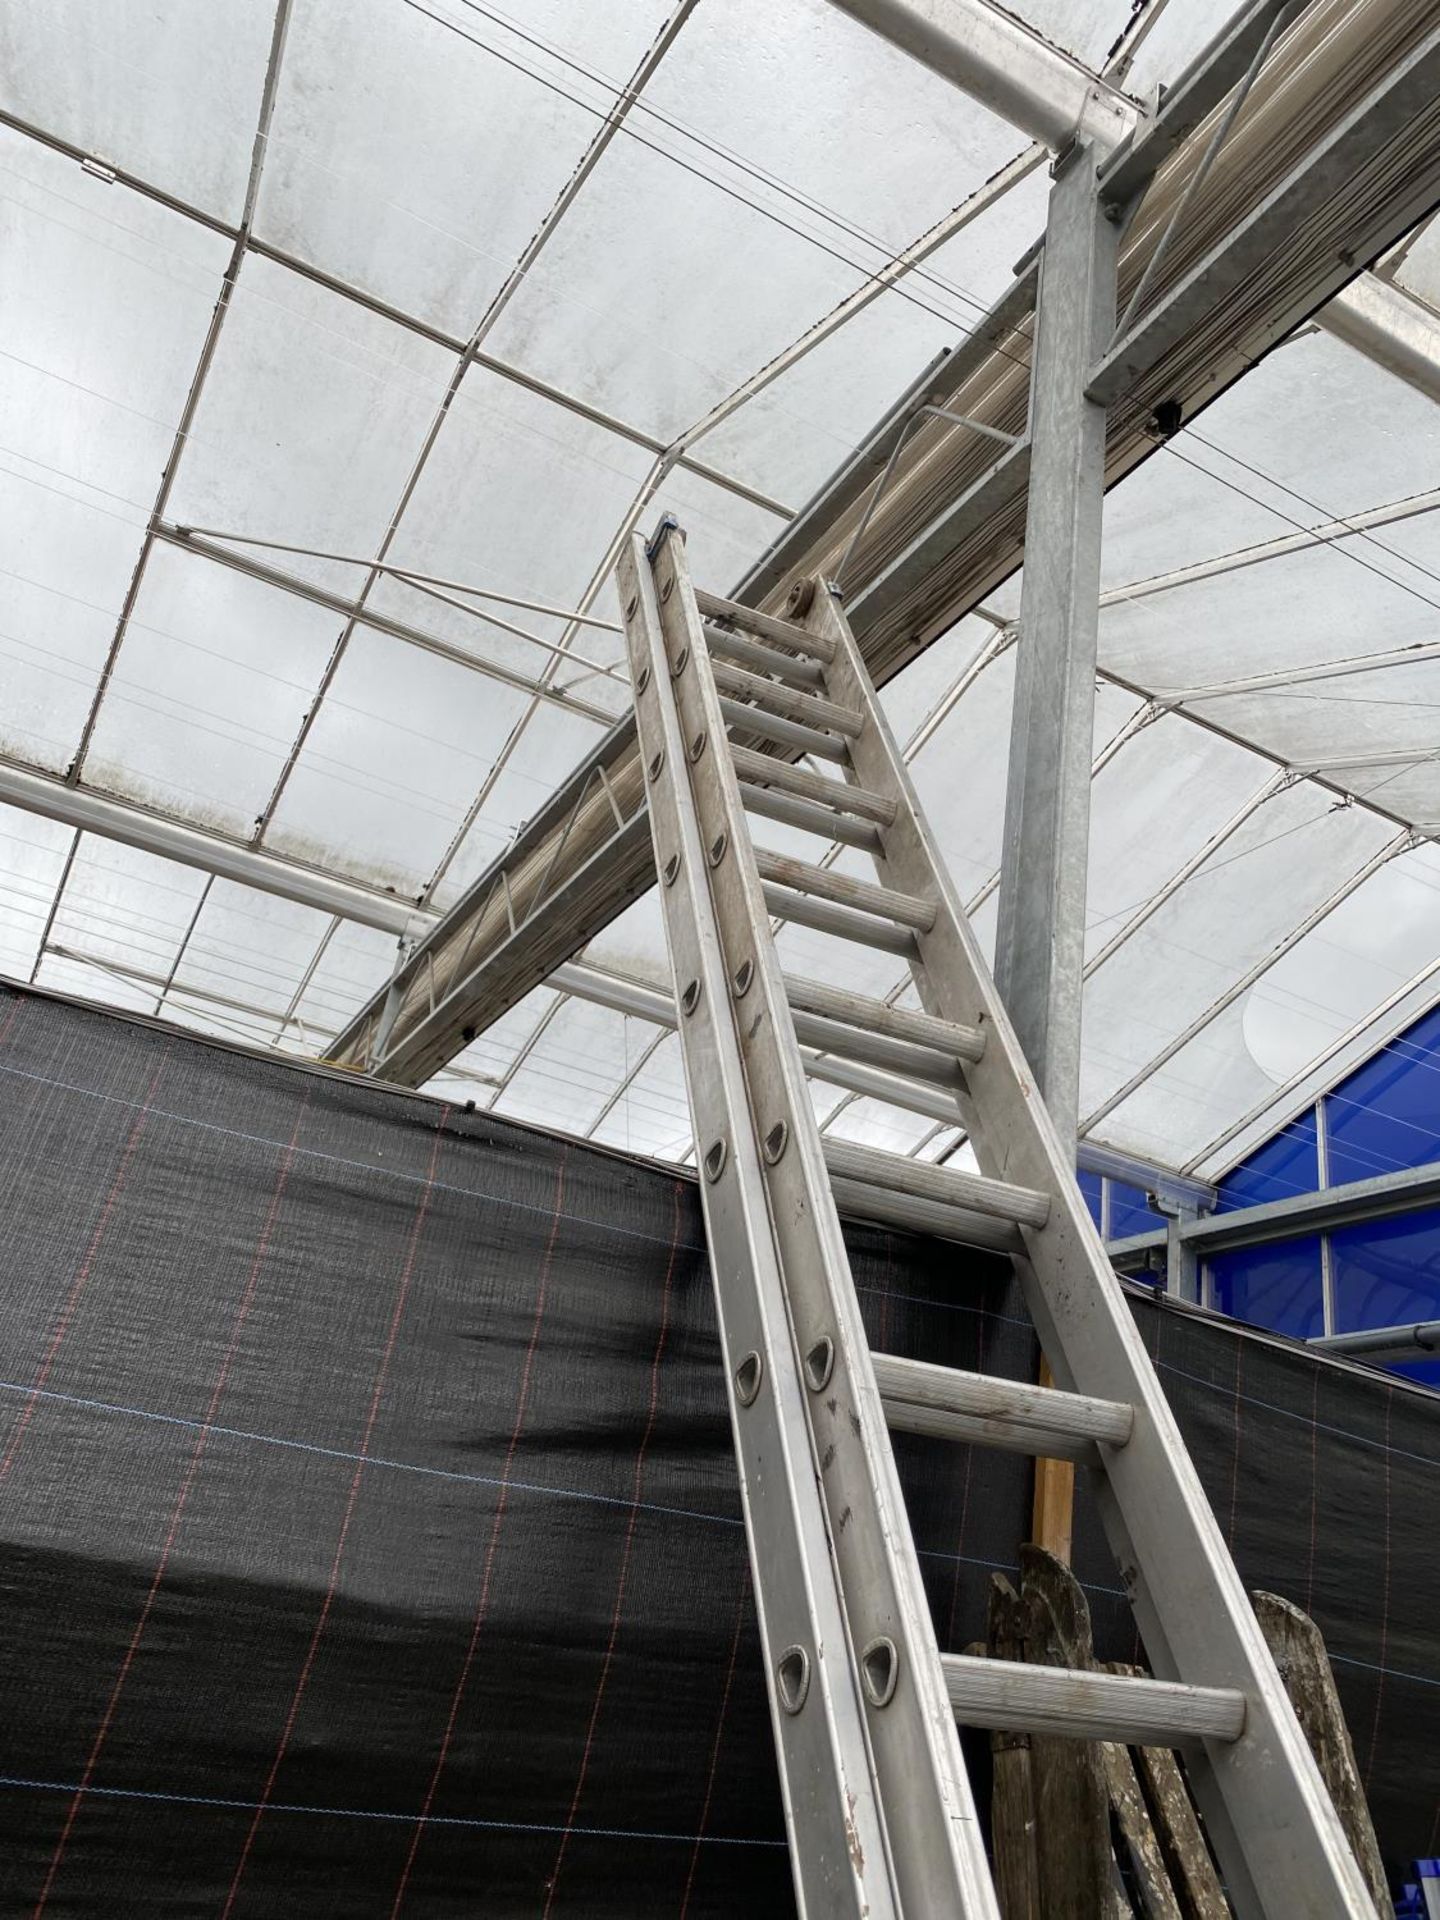 A TWO SECTION 160 RUNG EXTENDABLE LADDER - Image 4 of 4